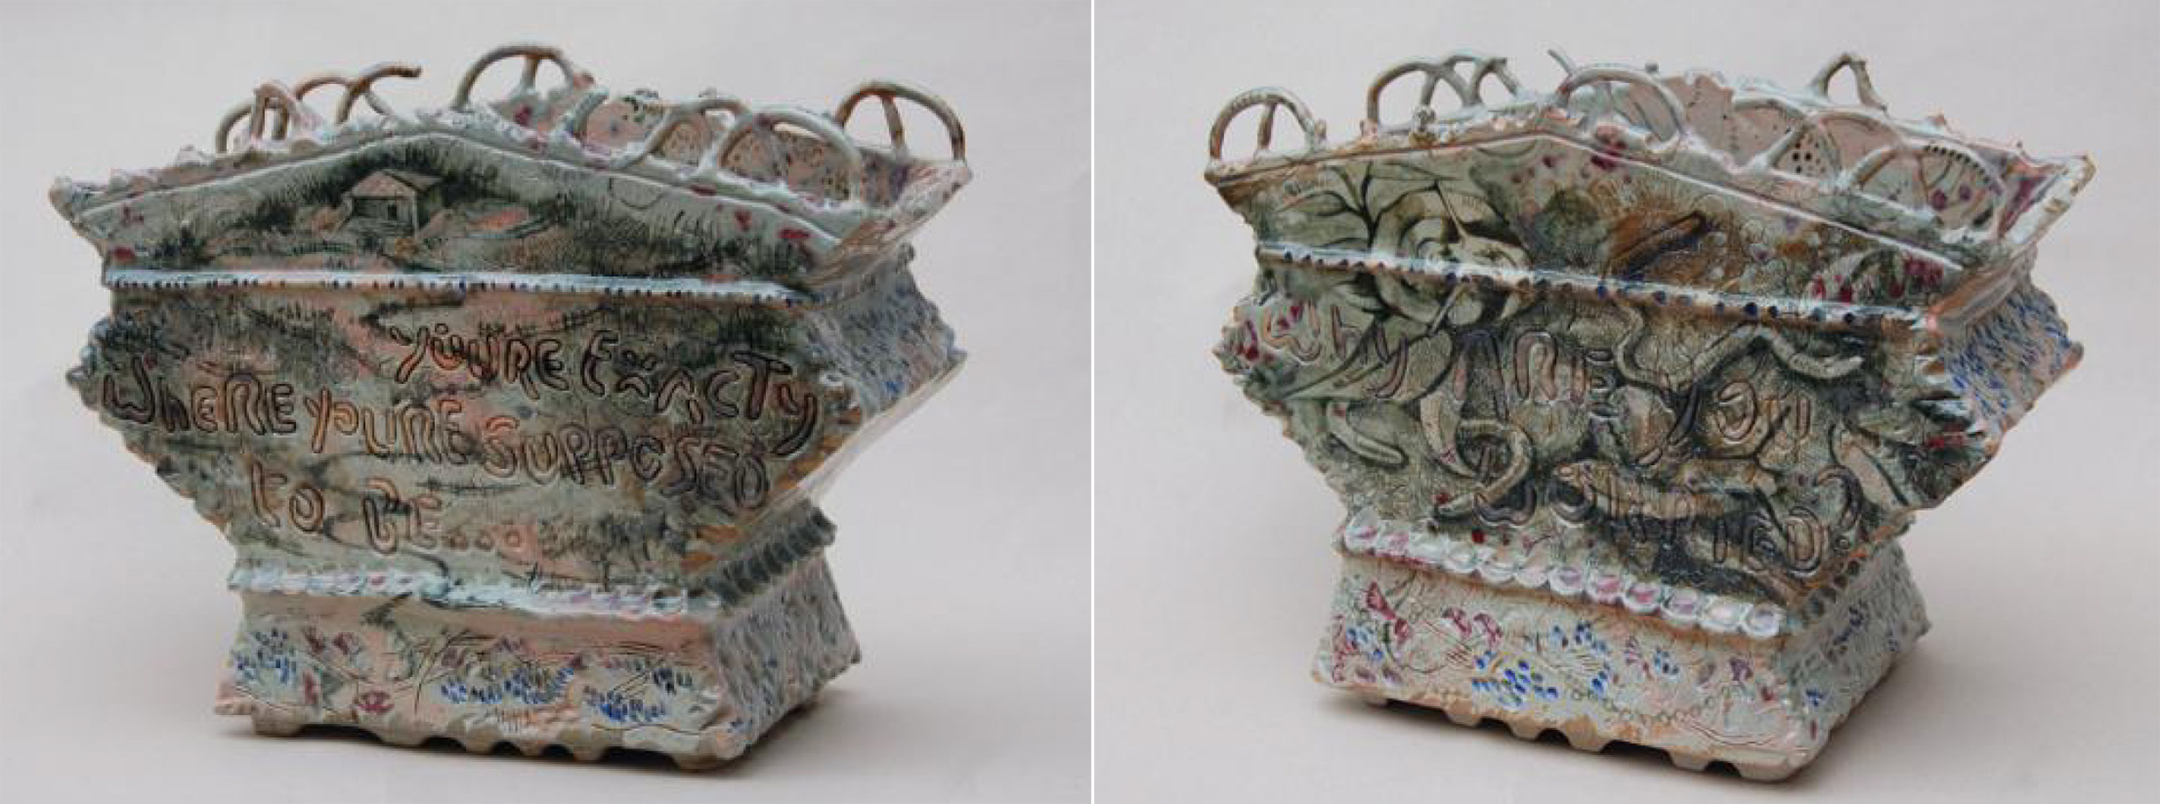 Two views, side by side, of an angular sculpture in green-gray glaze